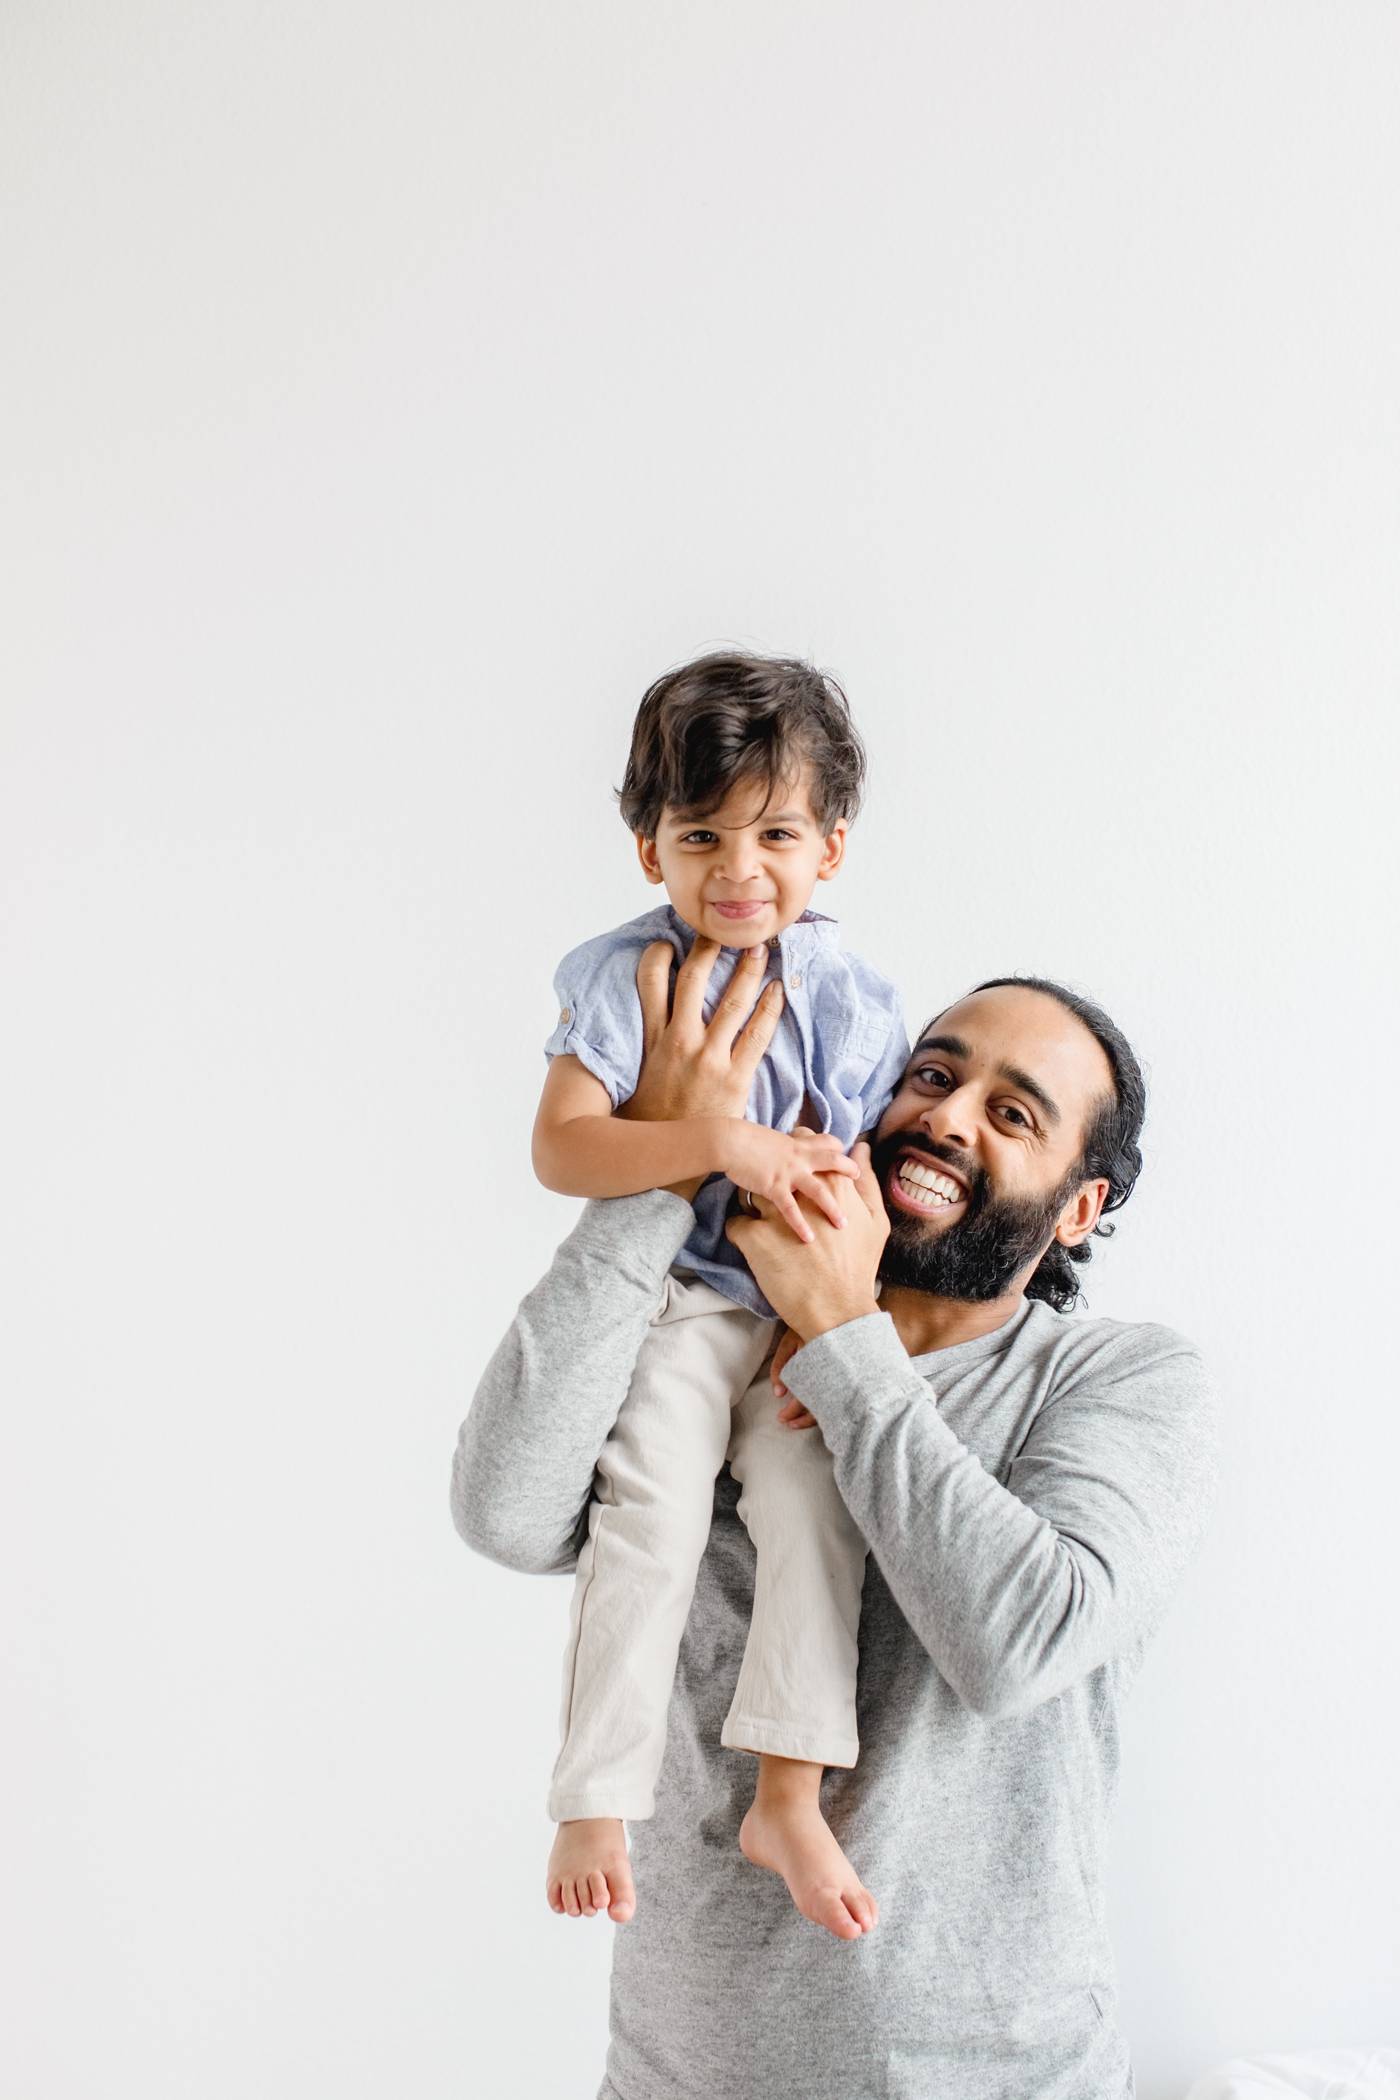 Toddler and Dad laughing and playing in studio session in Austin TX.Photo by Sana Ahmed Photography.